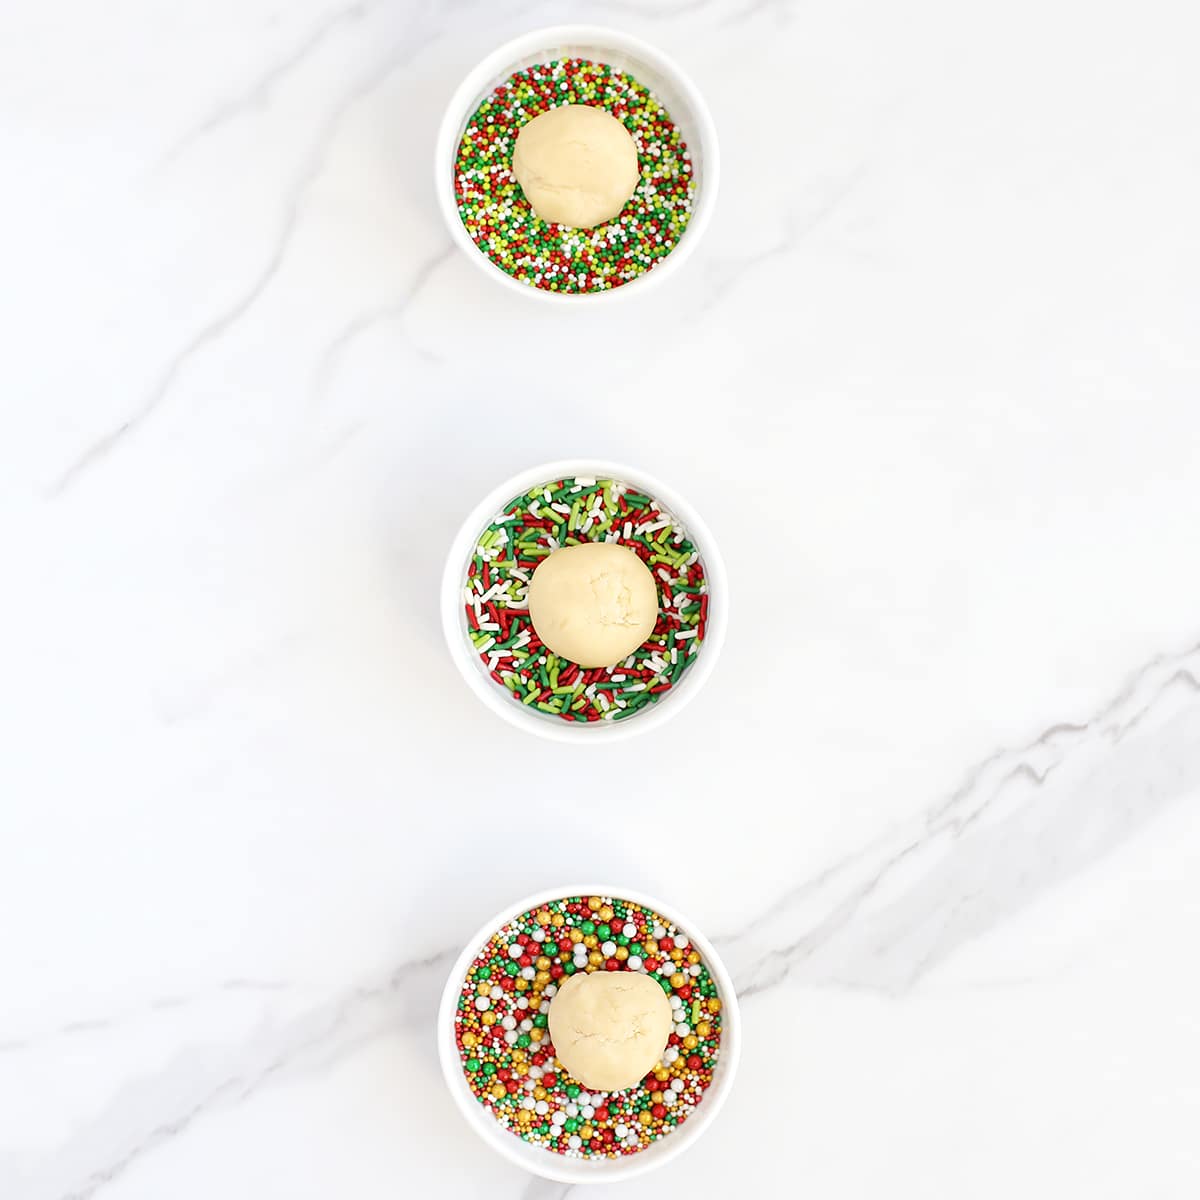 Three small bowls of sprinkles with a ball of cookie dough in each.